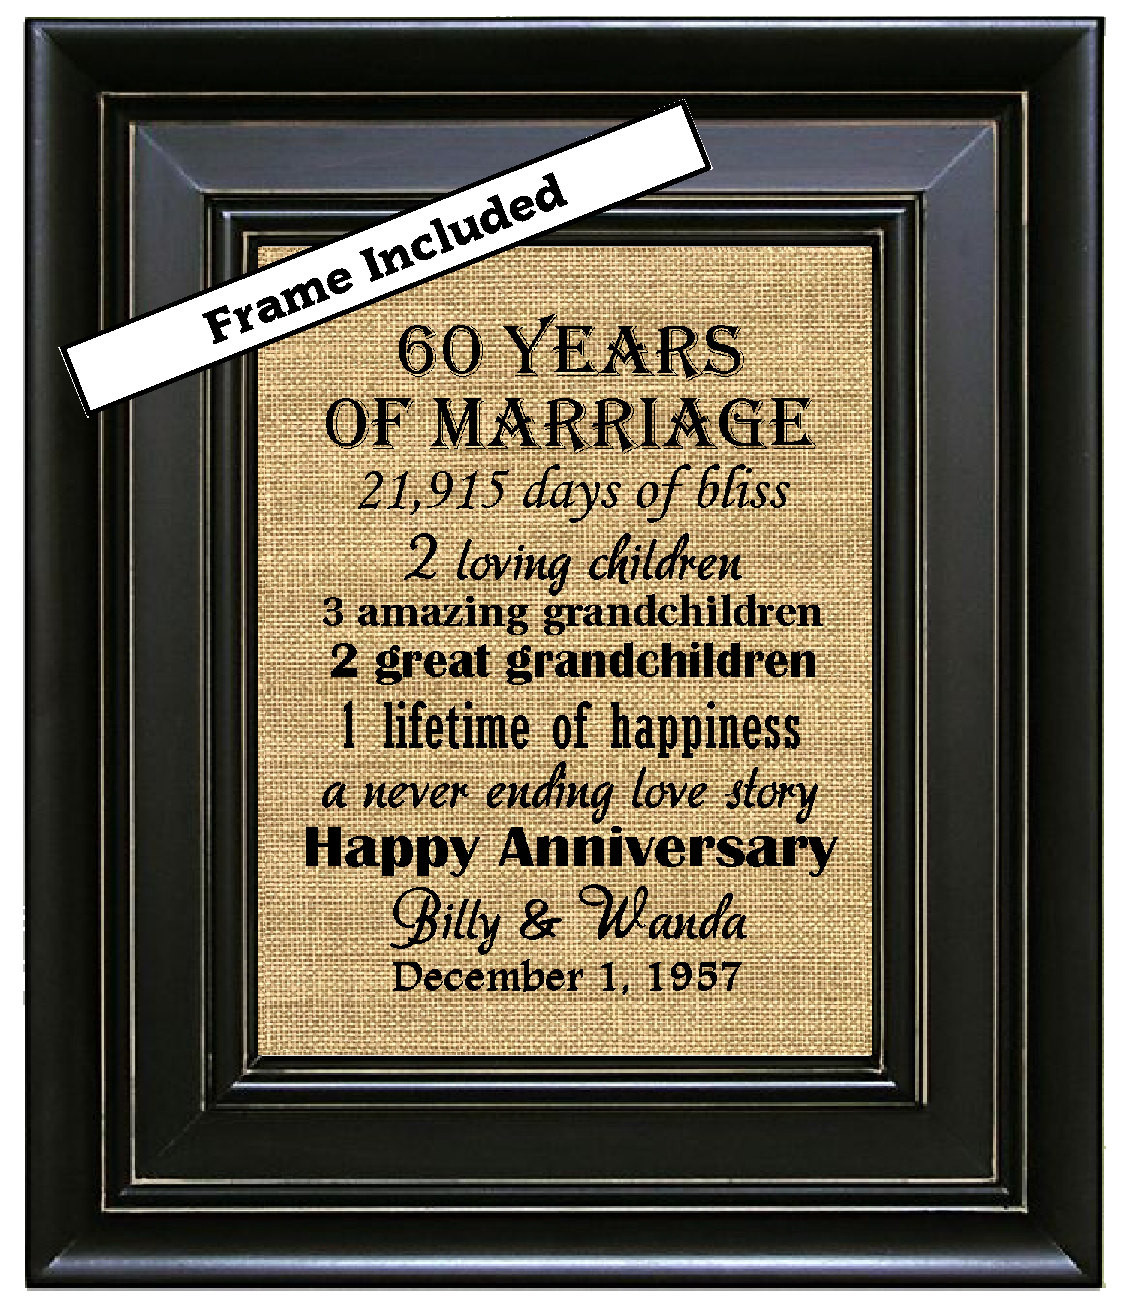 Traditional 60th Birthday Gifts
 FRAMED 60th Wedding Anniversary 60th Anniversary Gifts 60th